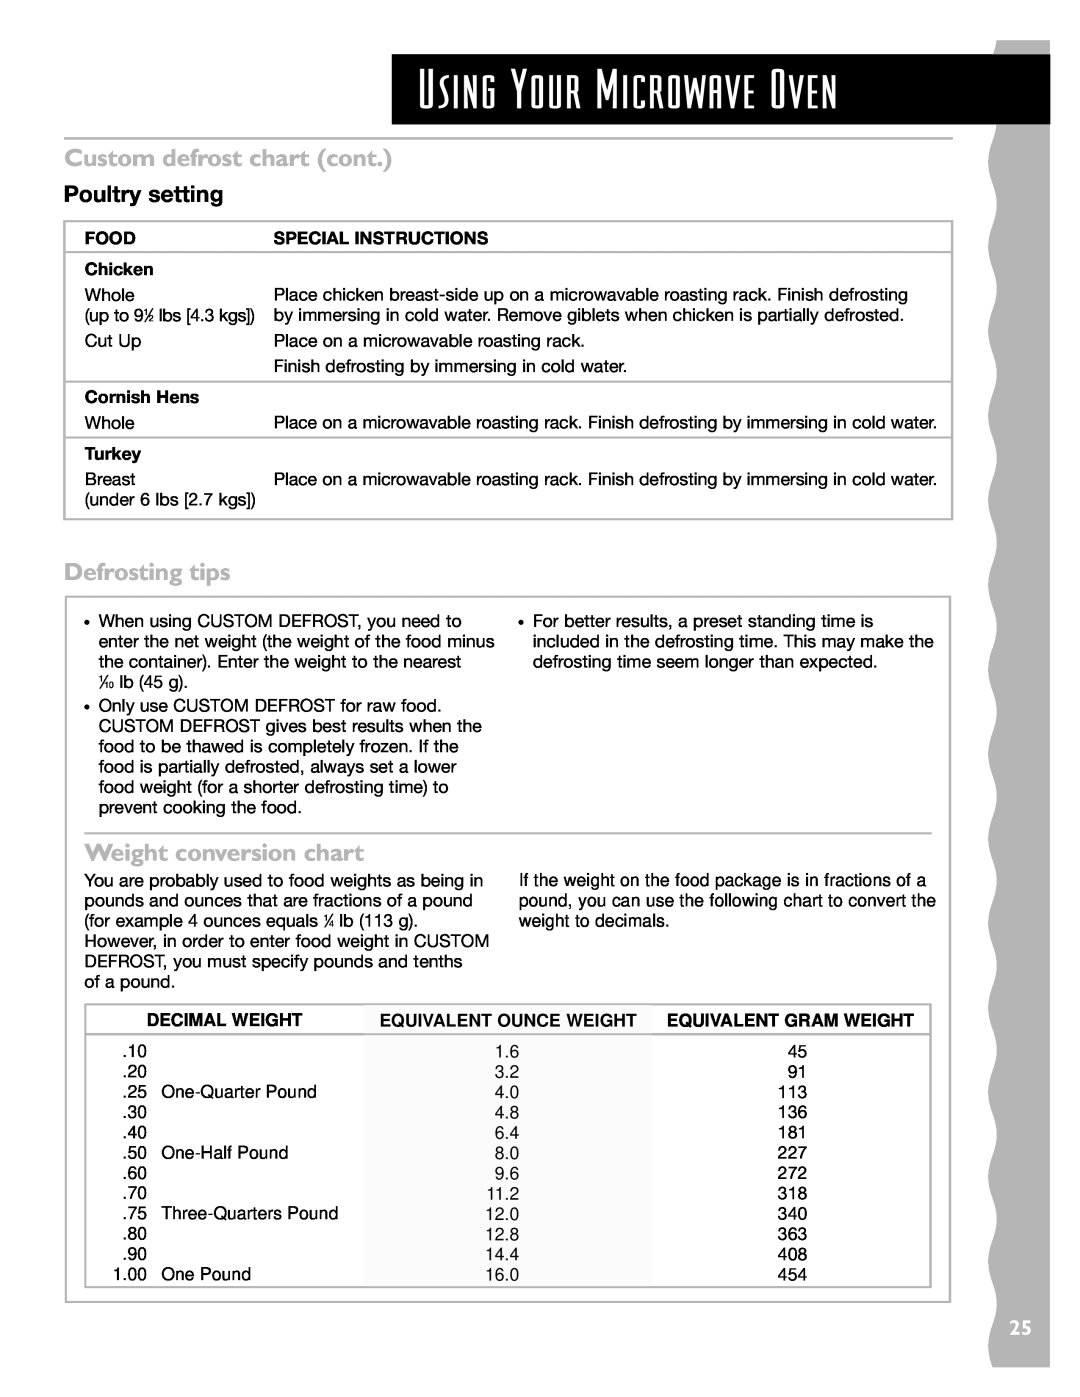 KitchenAid KHMS145J Custom defrost chart cont, Defrosting tips, Weight conversion chart, Poultry setting, Decimal Weight 